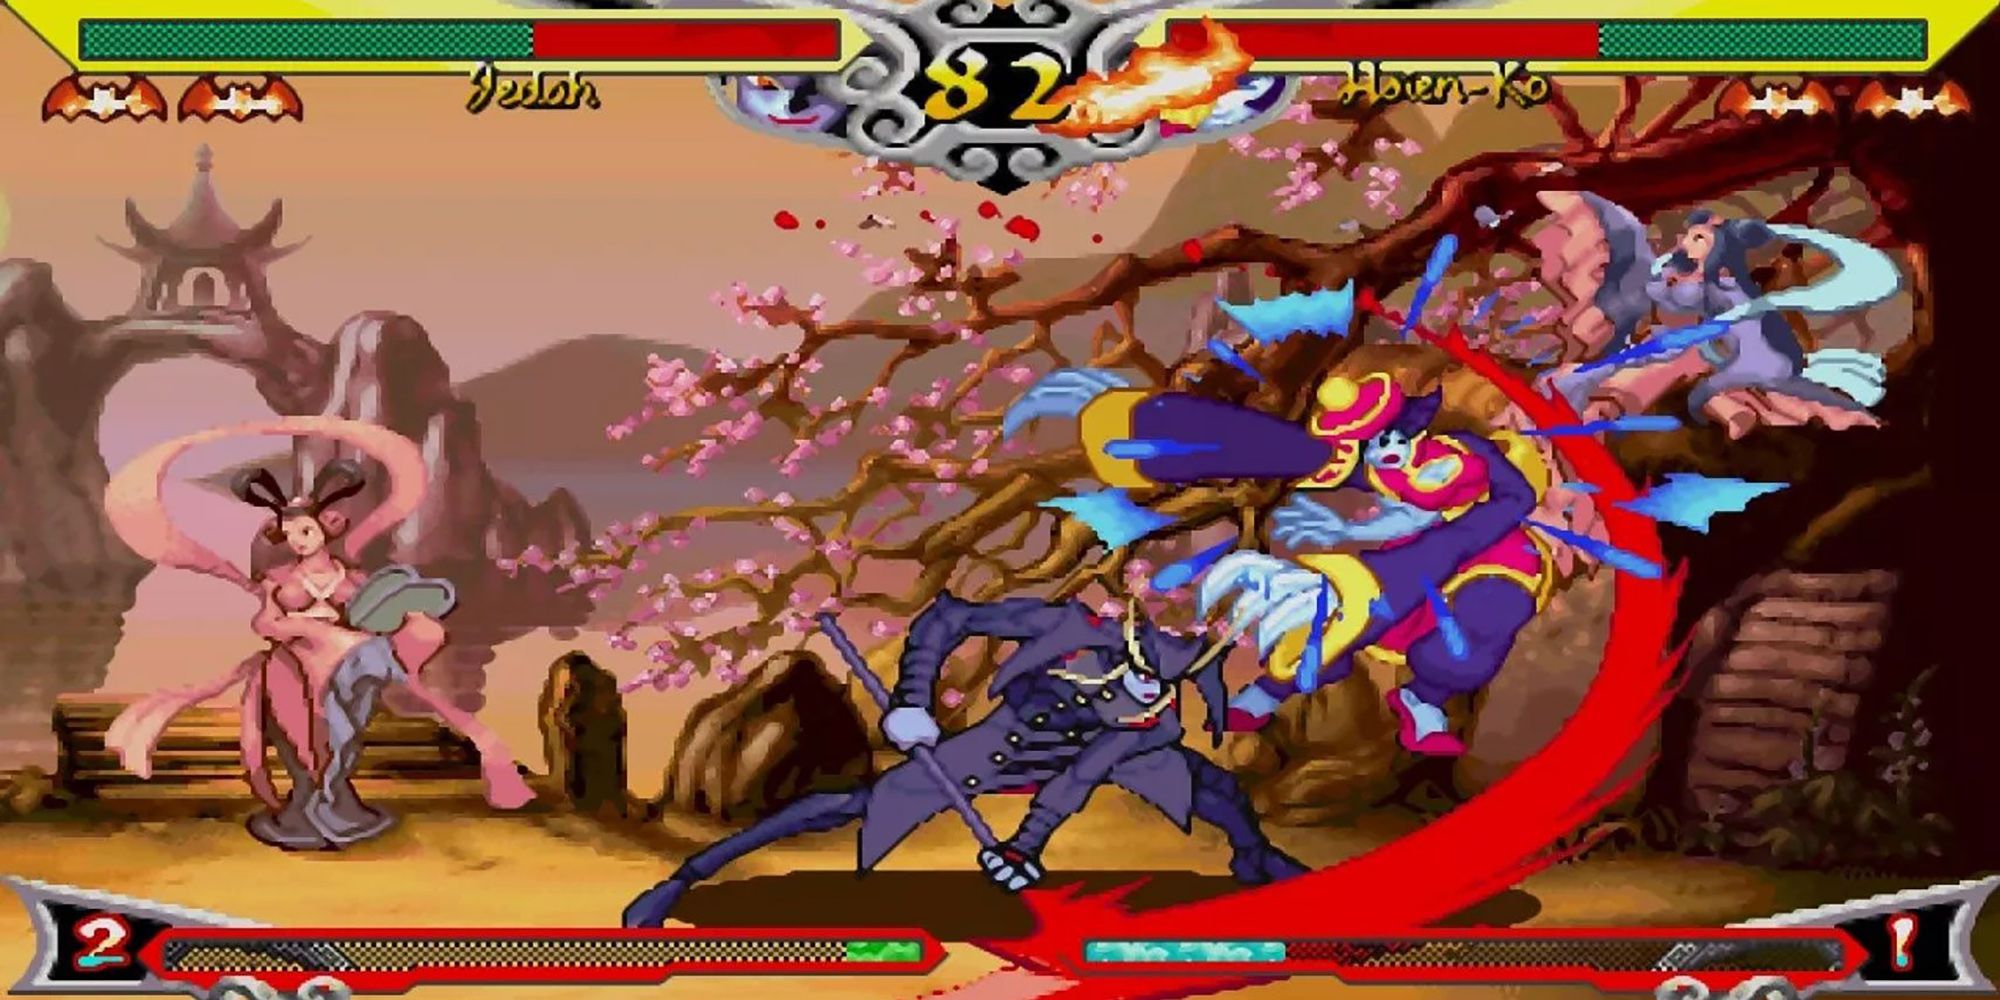 Jedah strikes Hsien-Ko with his scythe near a cherry blossom tree in Darkstalkers Chronicles: The Chaos Tower.